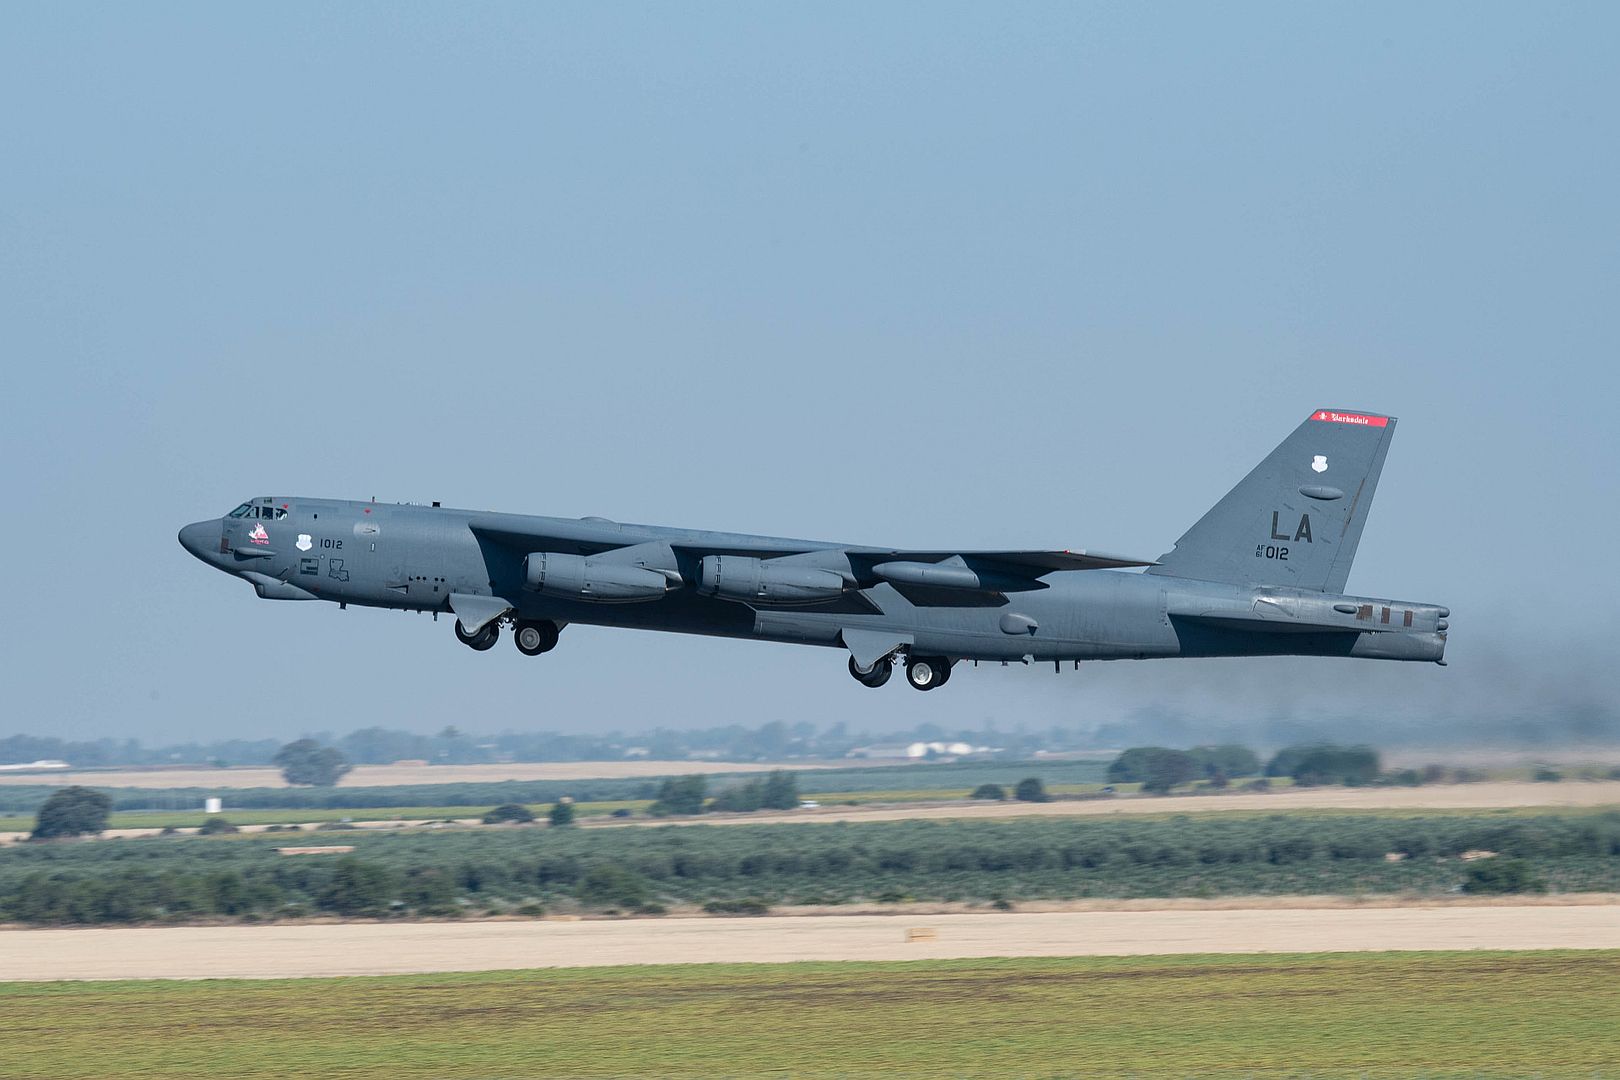 52H Stratofortress Assigned To The 2nd Bomb Wing Barksdale Air Force Base Louisiana Takes Off From Mor N Air Base Spain June 14 2021